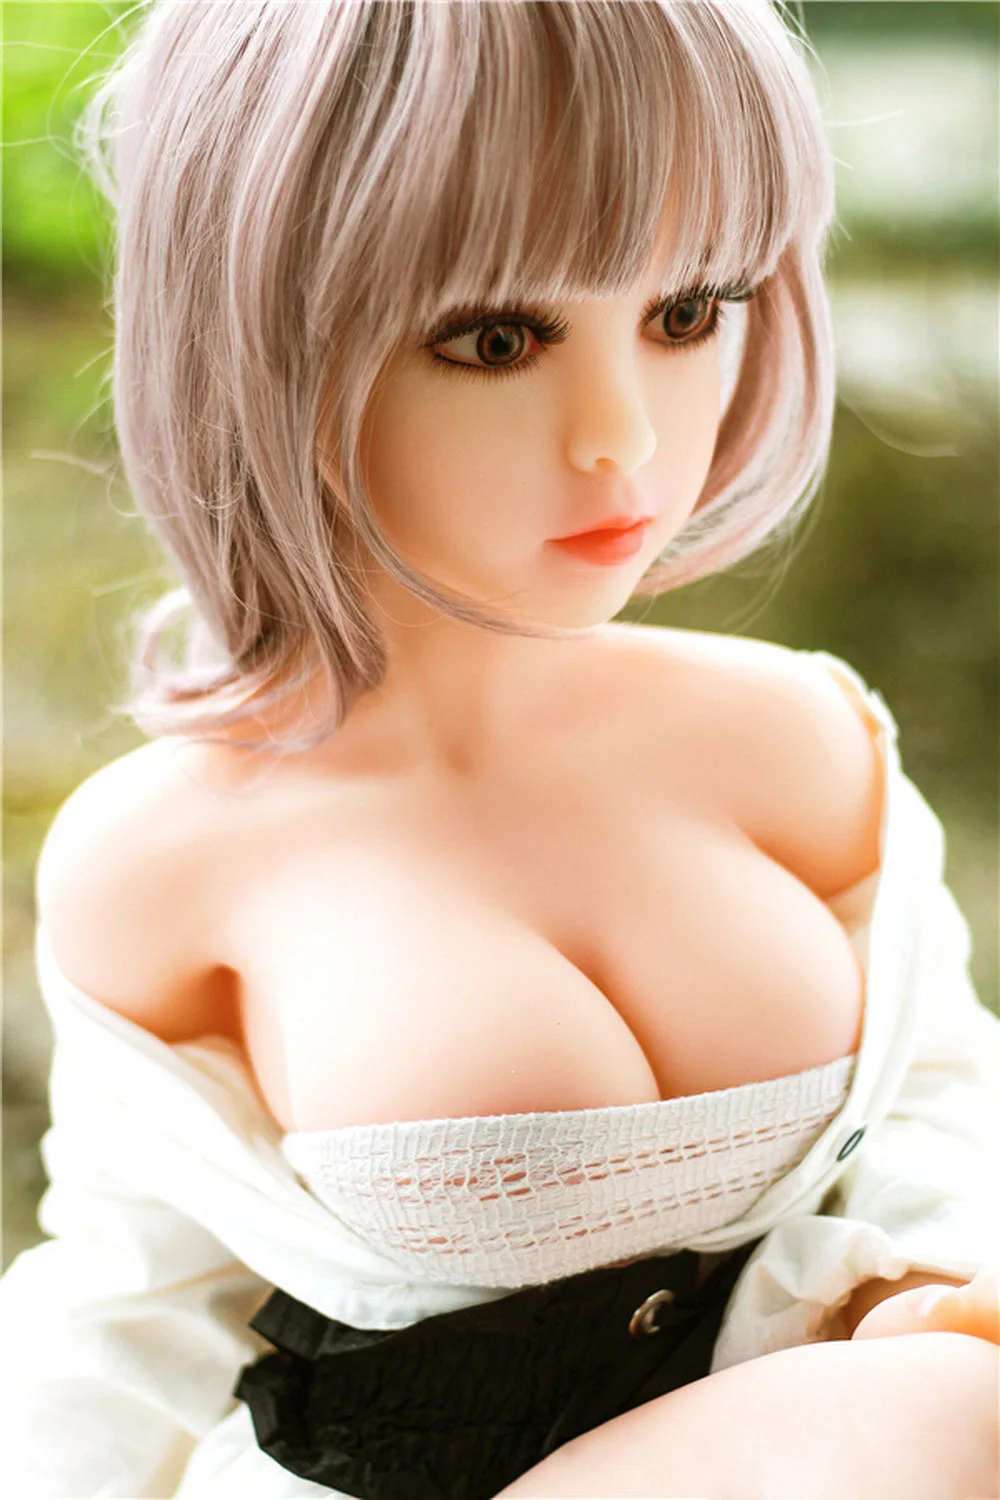 Mini sex doll with short pink hair